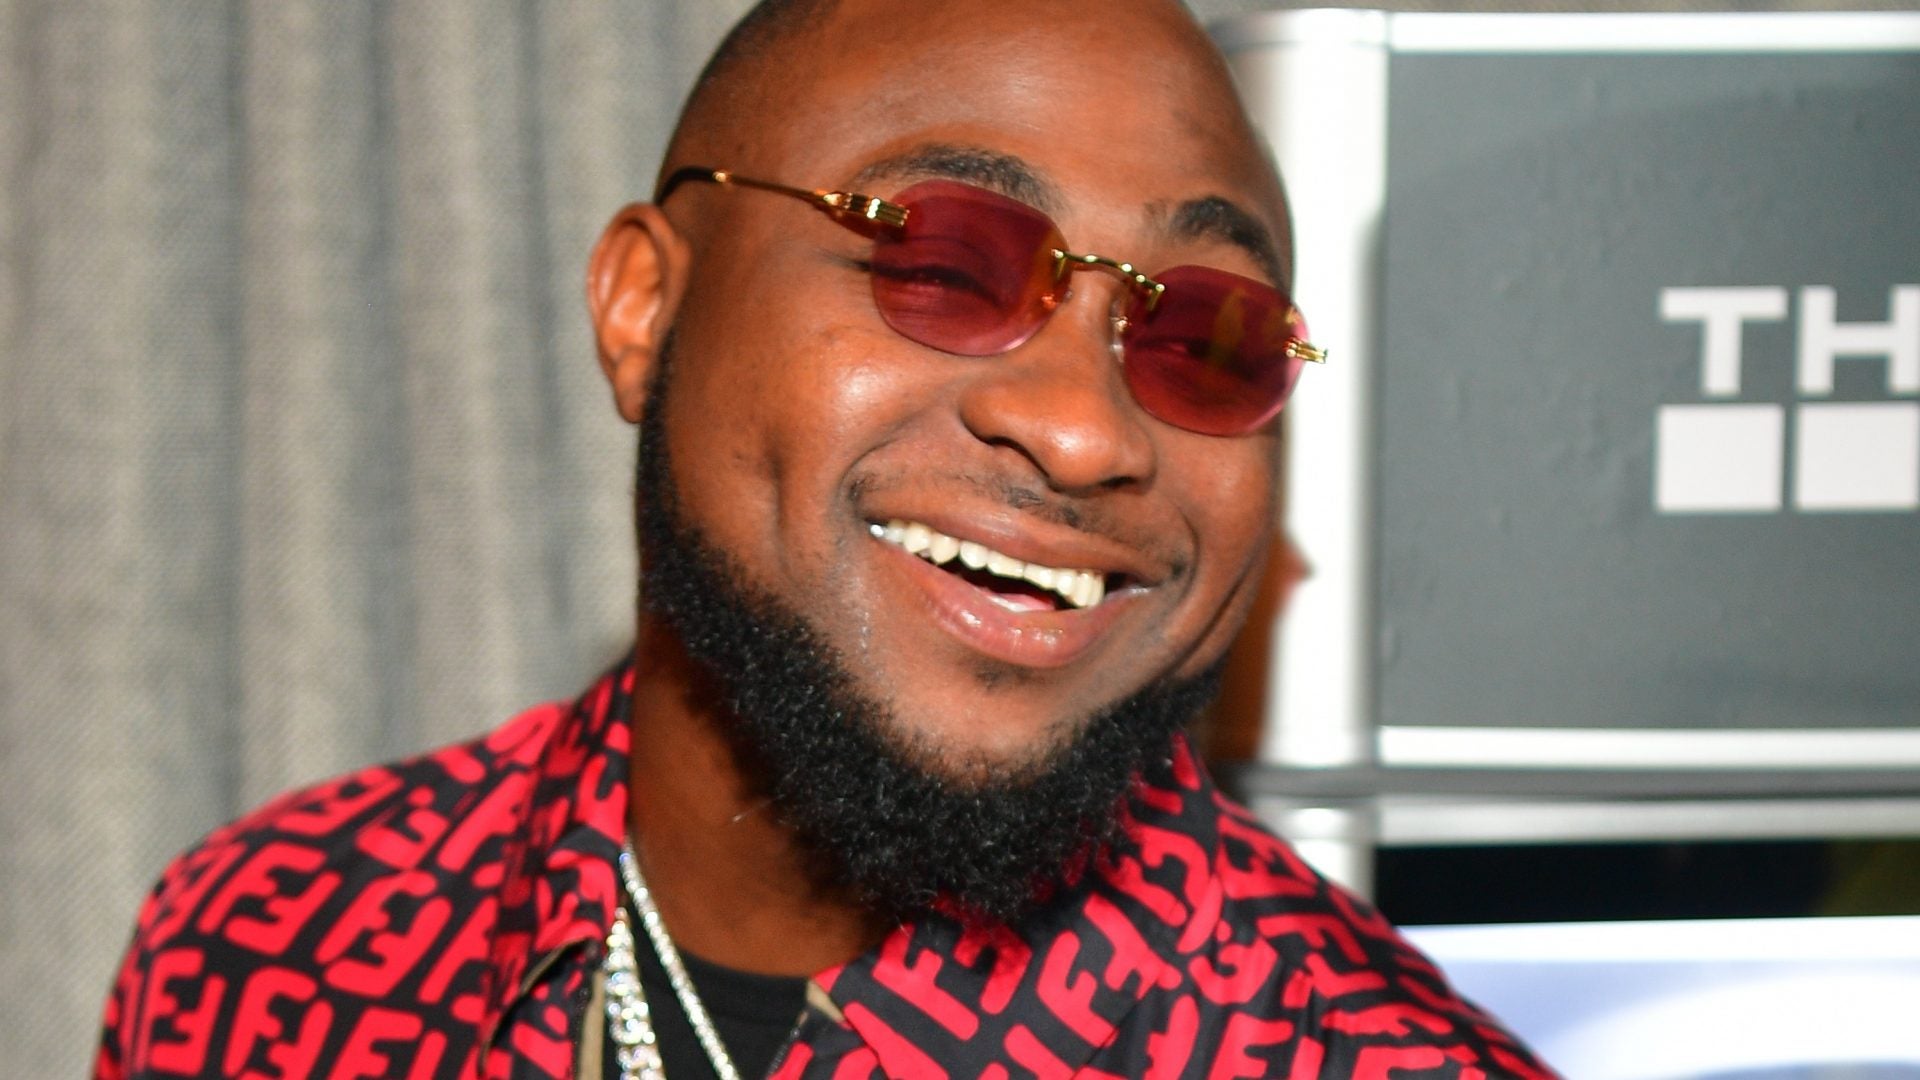 Davido Wishes His Hit Song “Fall” Would Die (In a Good Way)